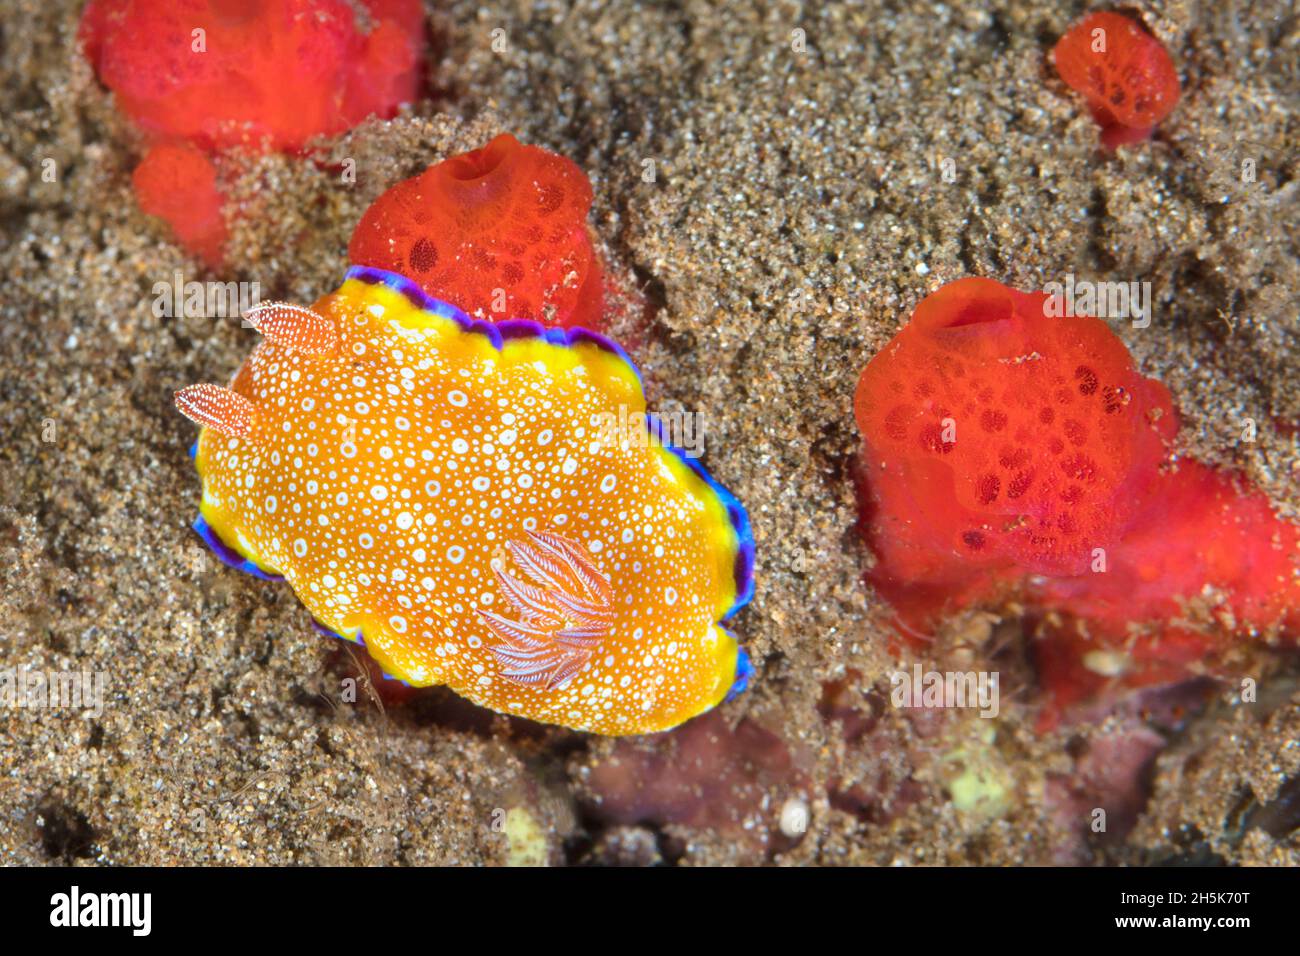 White Spotted Nudibranch (Goniobranchus albopunctatus) on coral reef, Maui; Hawaii, United States of America Stock Photo